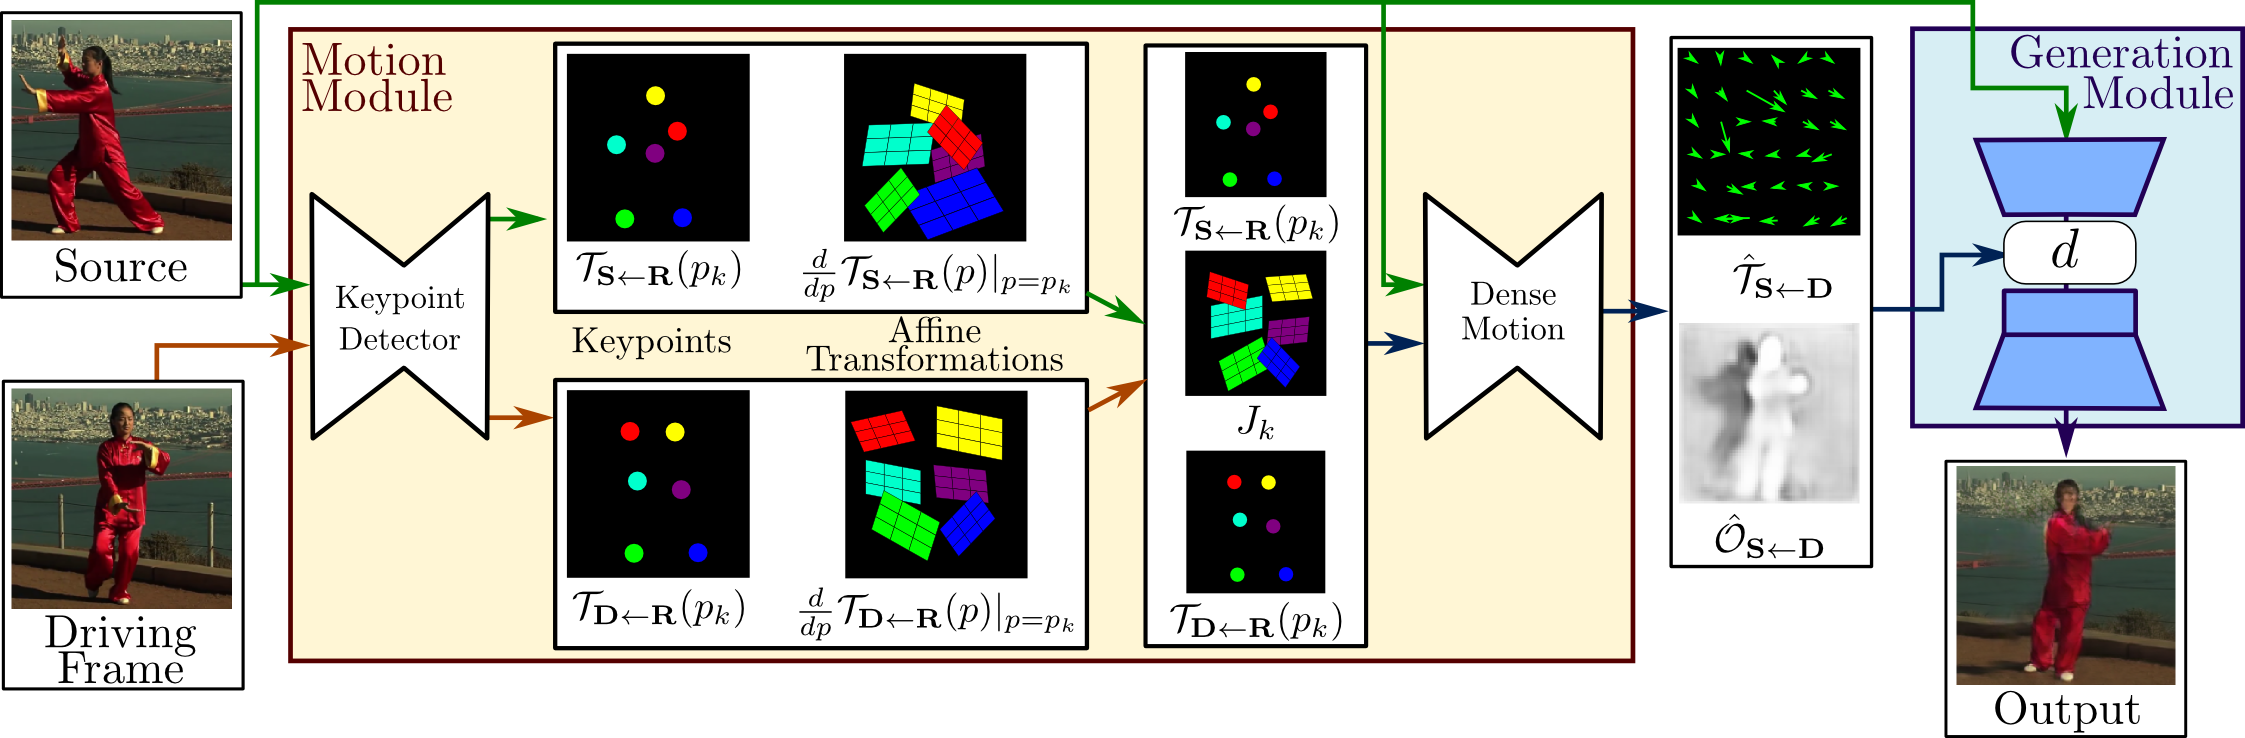 A schematic representation of the proposed motion transfer framework for image animation